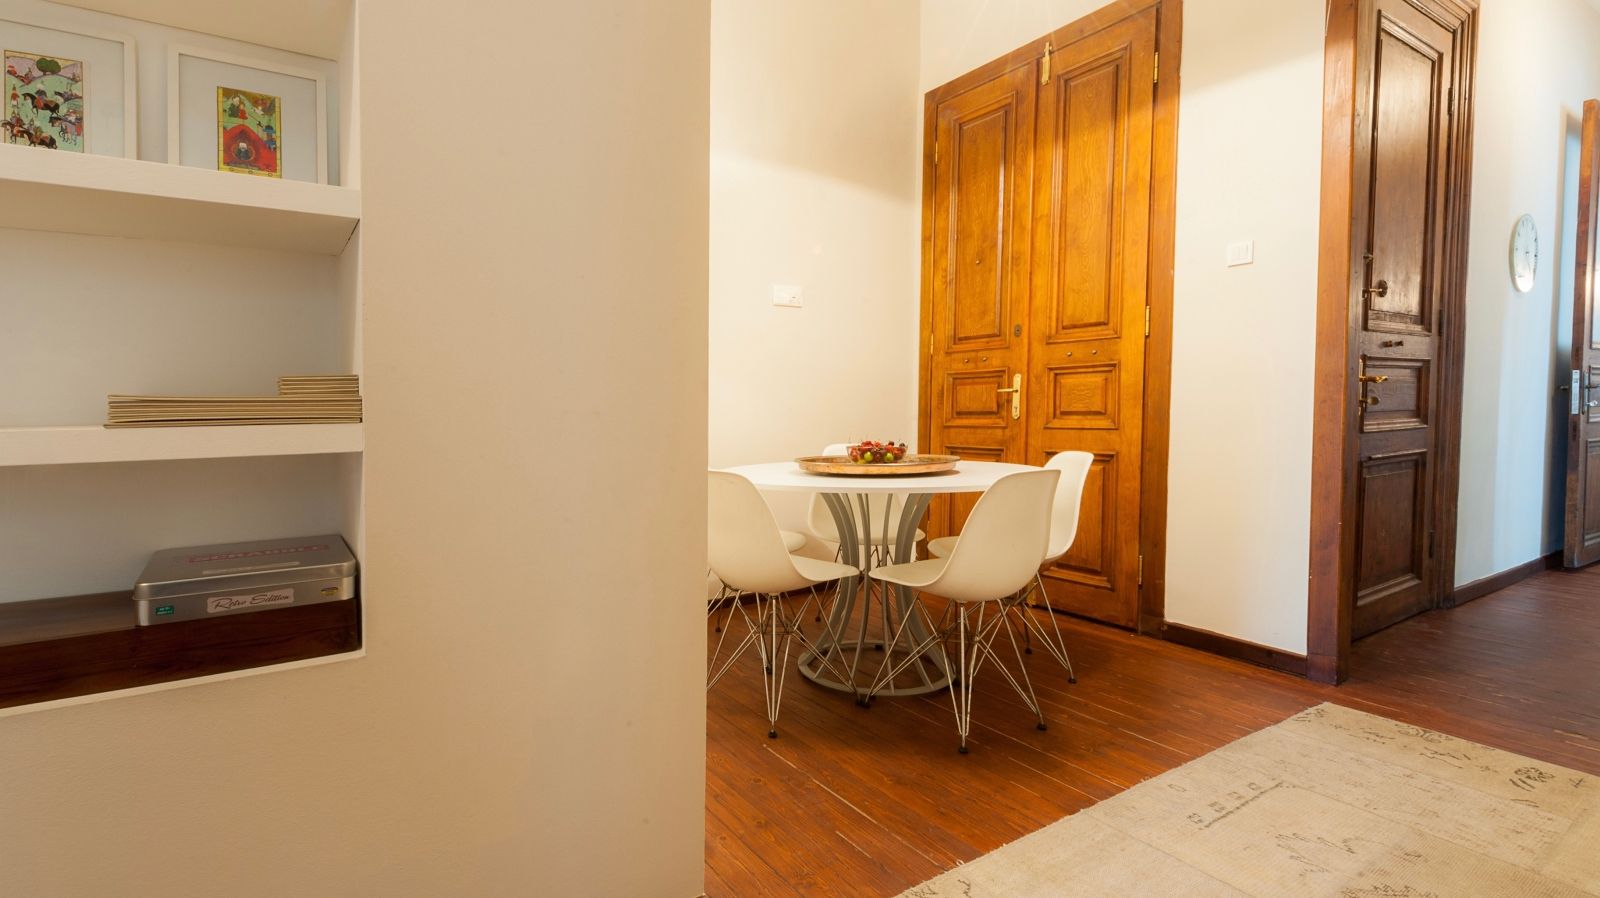 Furnished three bedroom apartment for residential rent with high ceilings, located right next to Galata Tower in Istanbul.